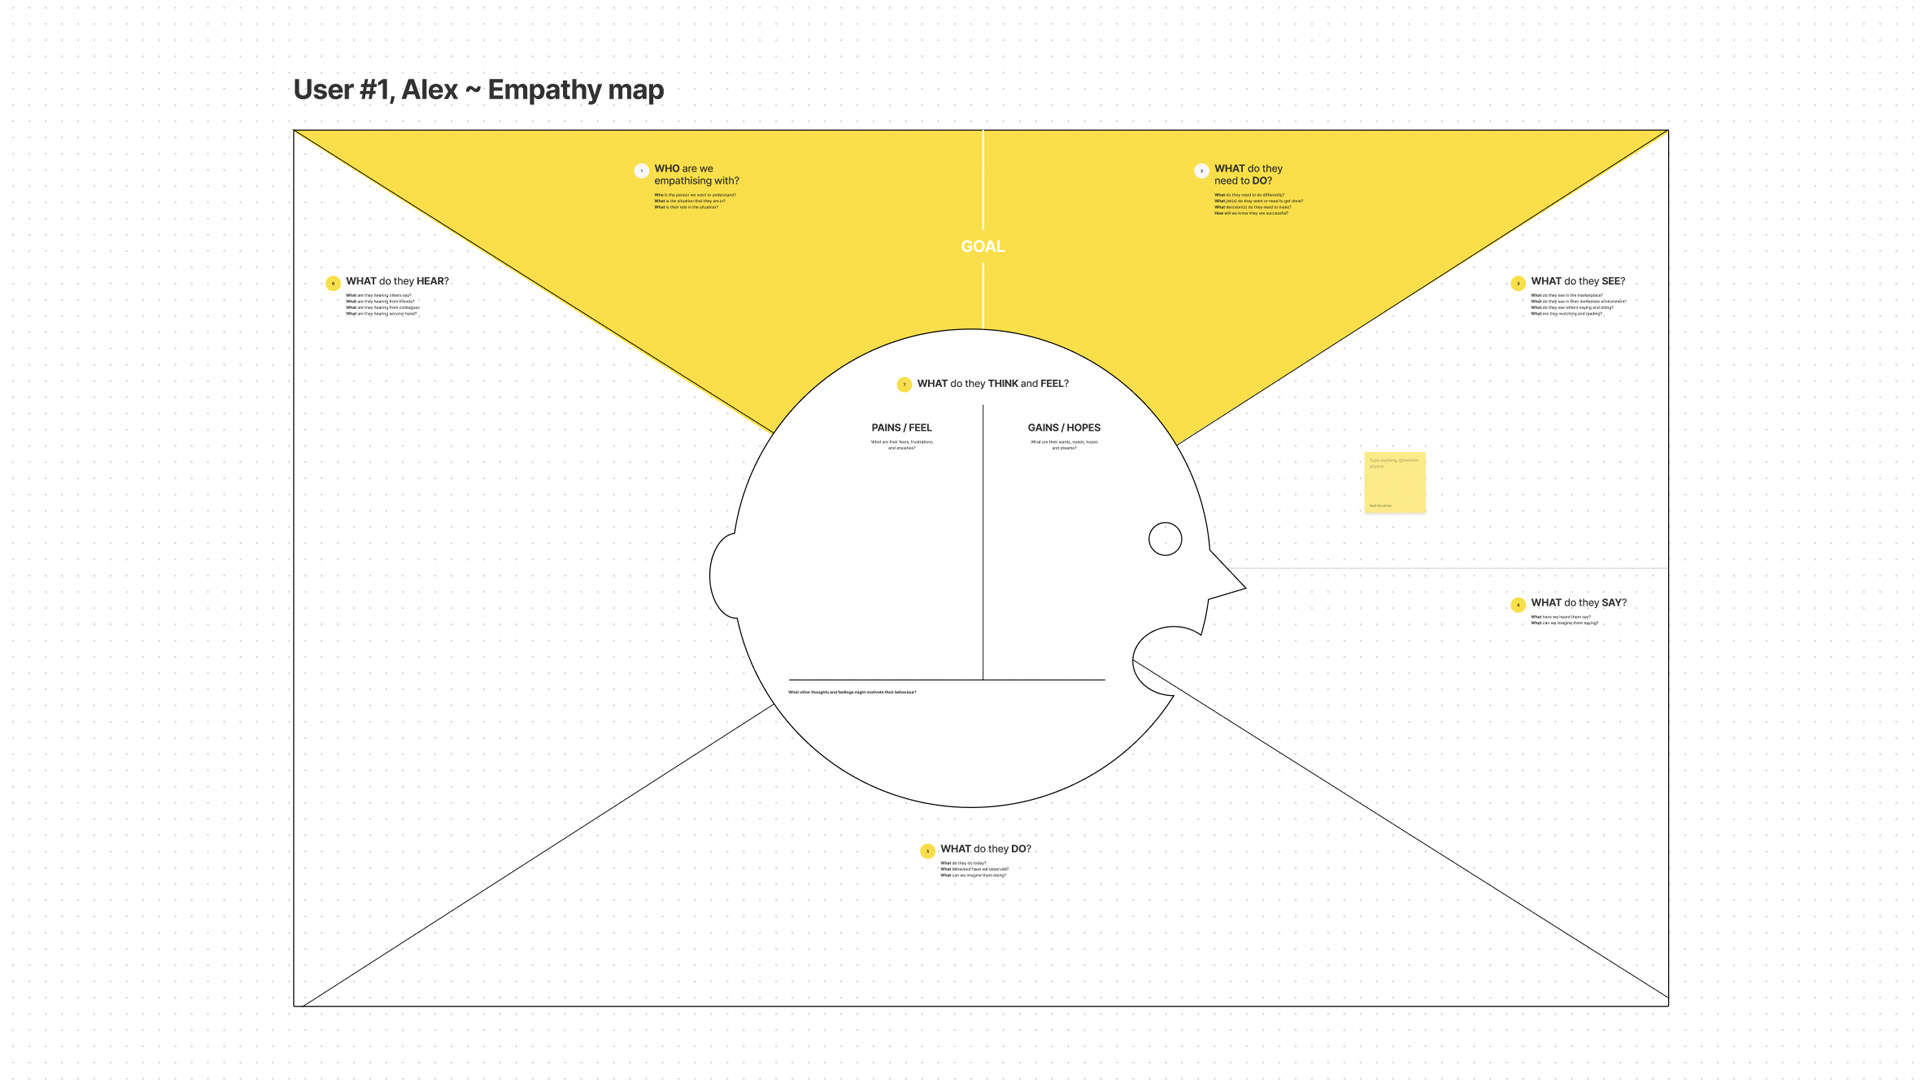 An empathy map template drawn up in FigJam